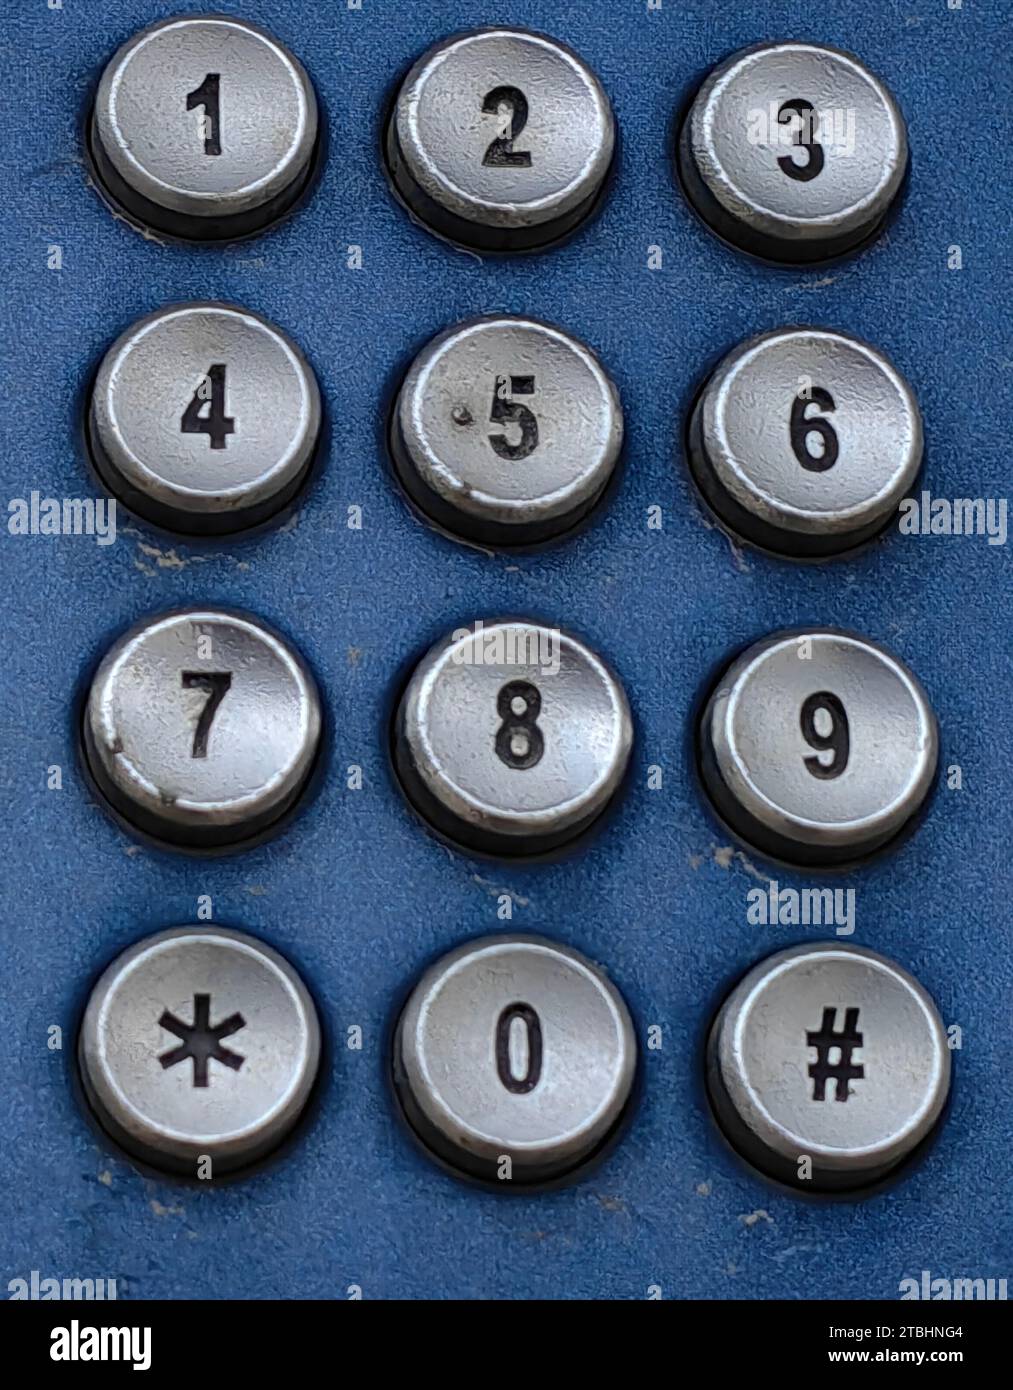 Tactile, digits. Part of the old phone. Silver Round shape. Blue background. Dial my number, concept. Stock Photo